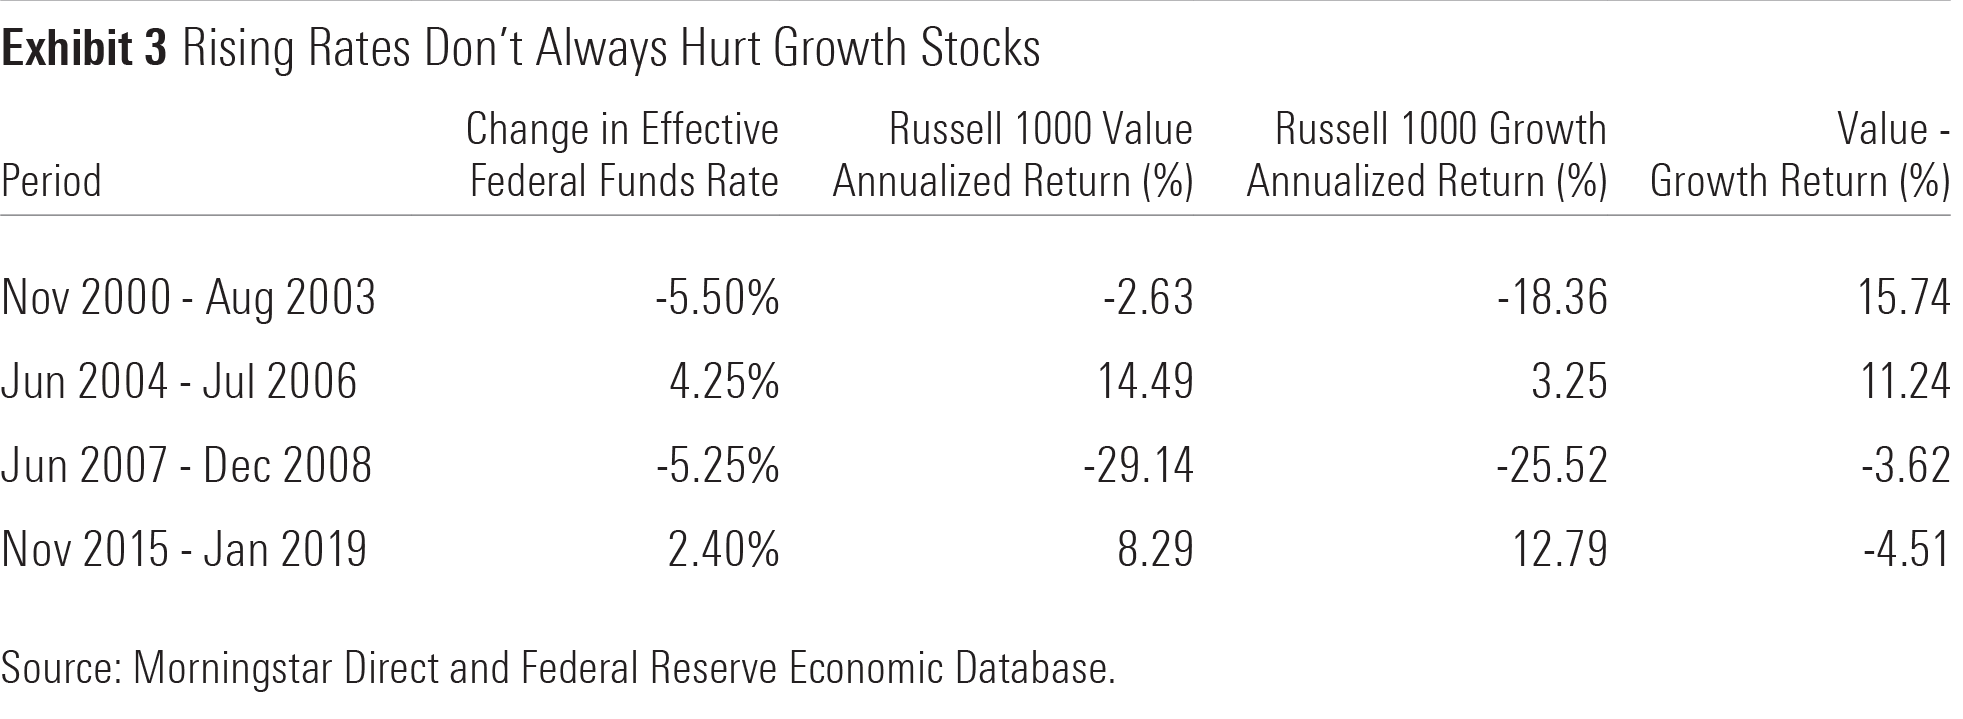 A table of how rising rates affected value and growth stocks over different time periods.